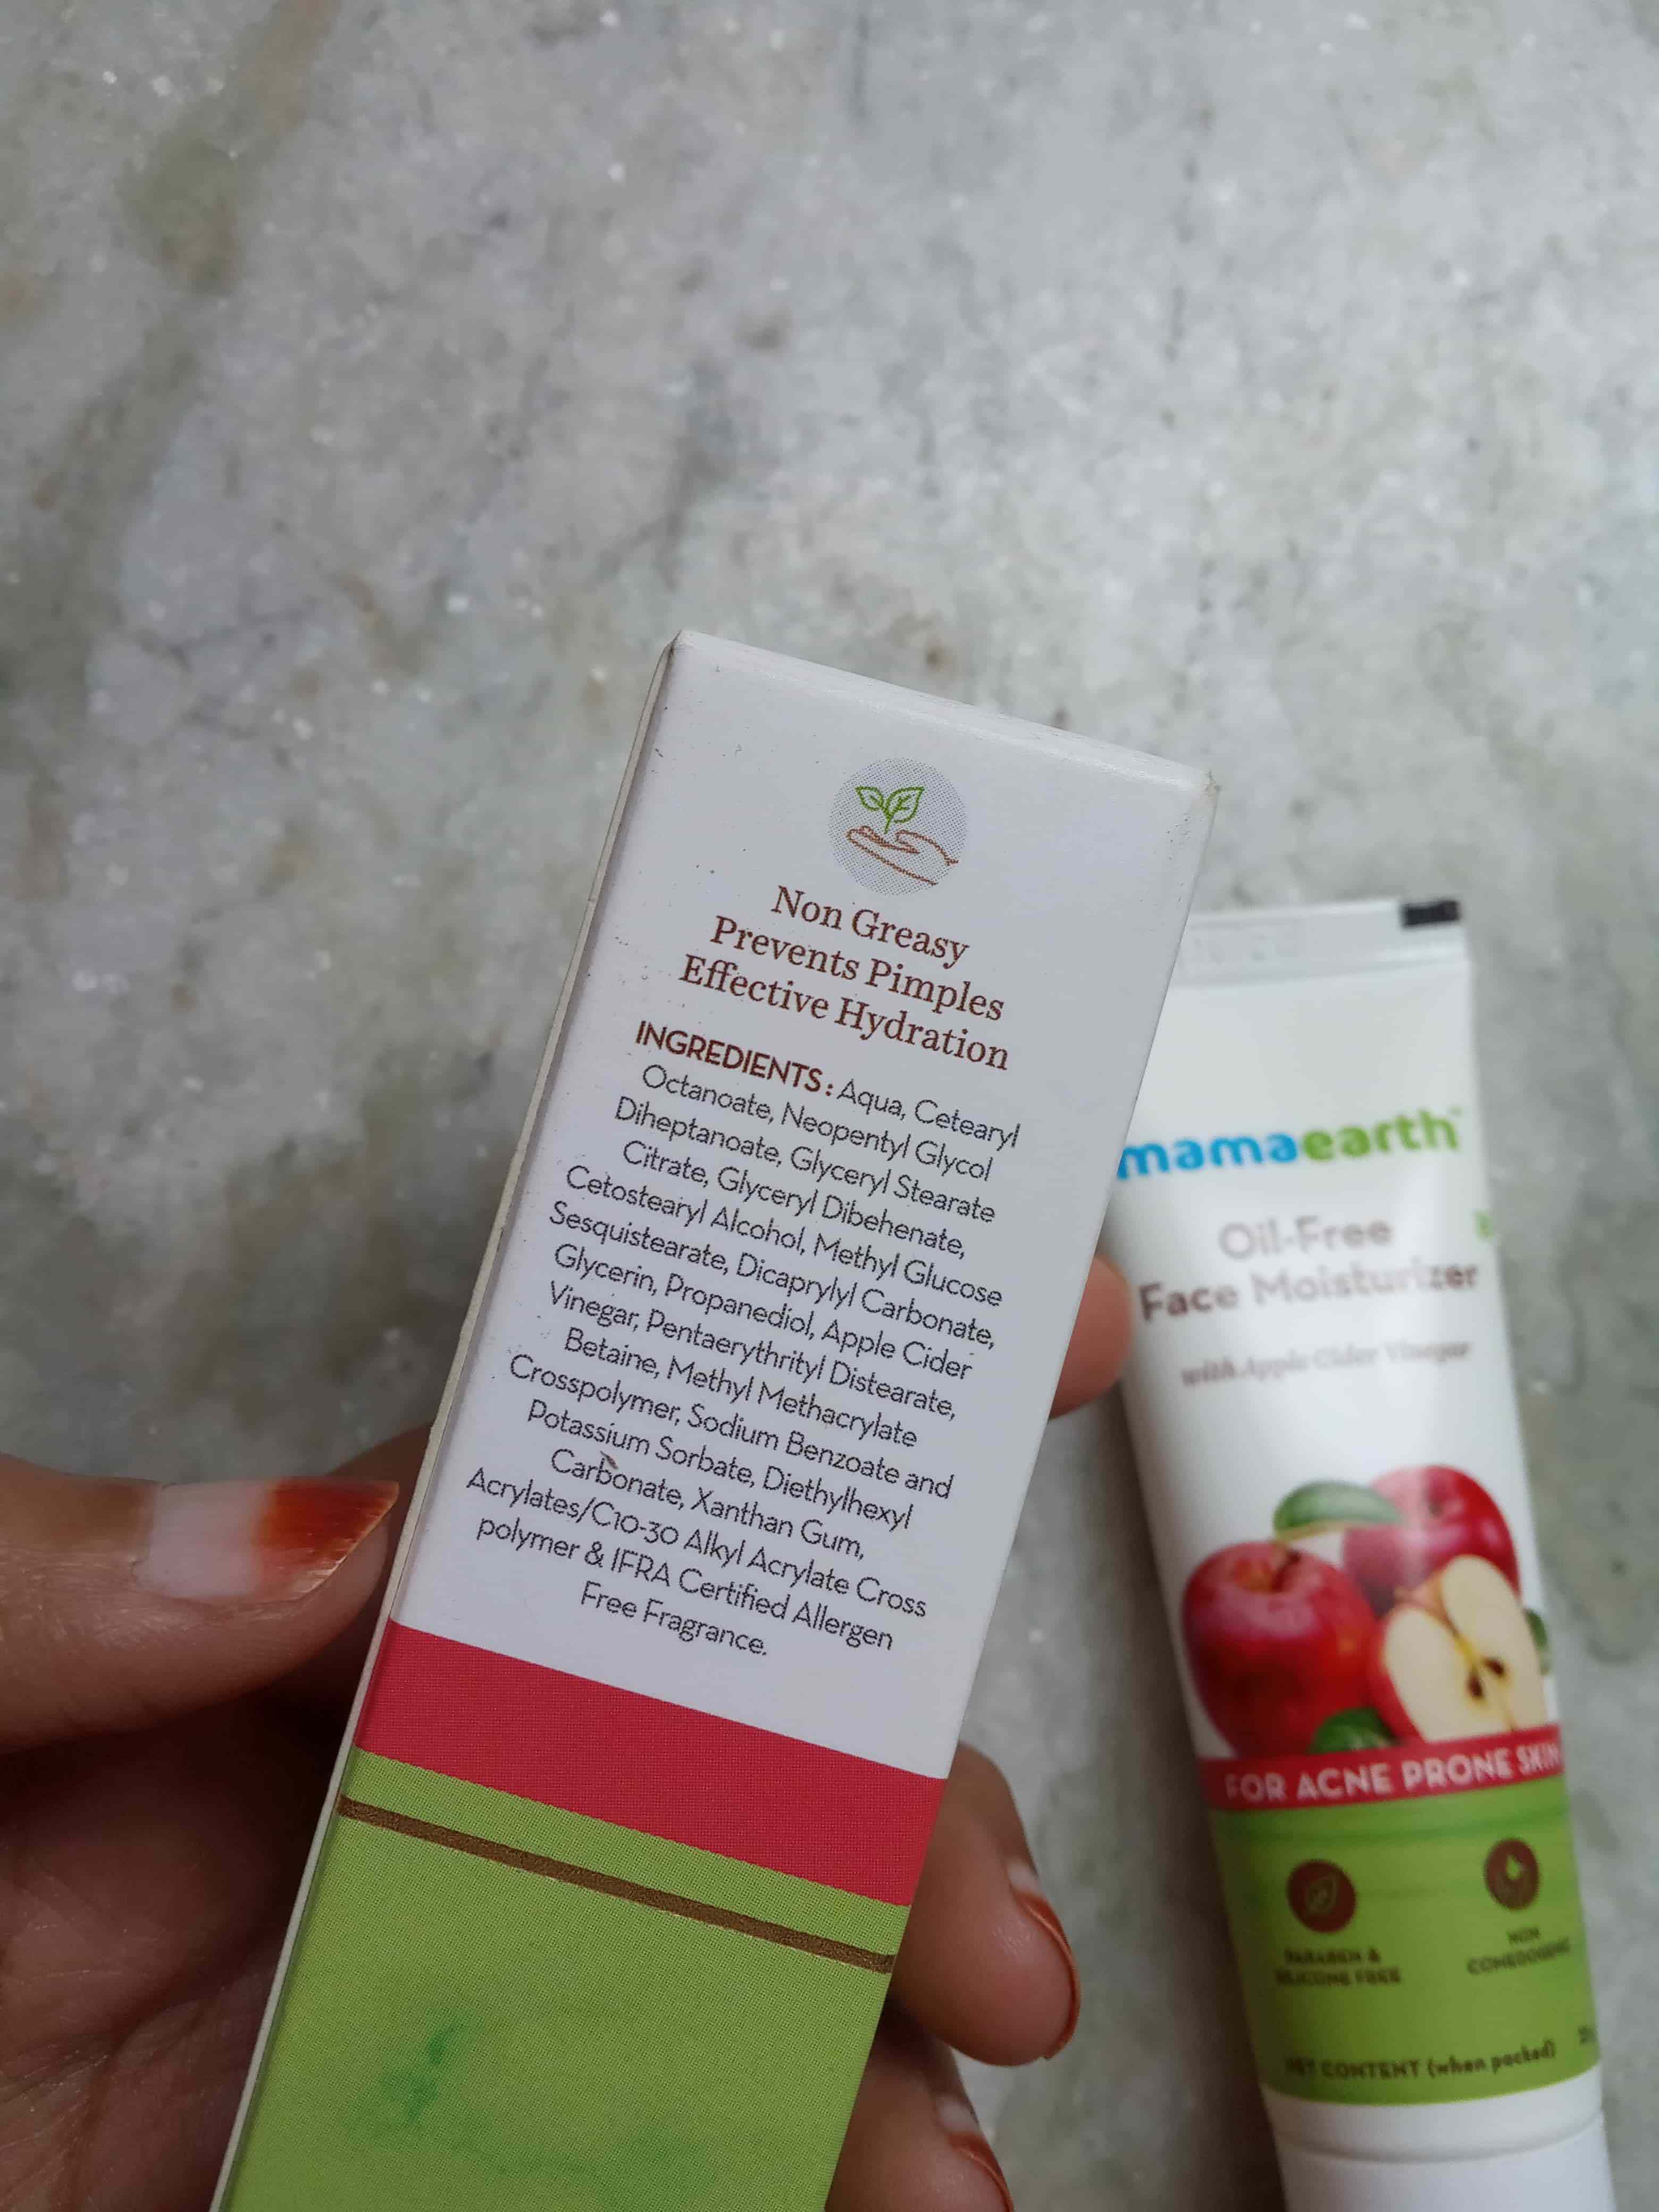 Mamaearth oil free face moisturizer review